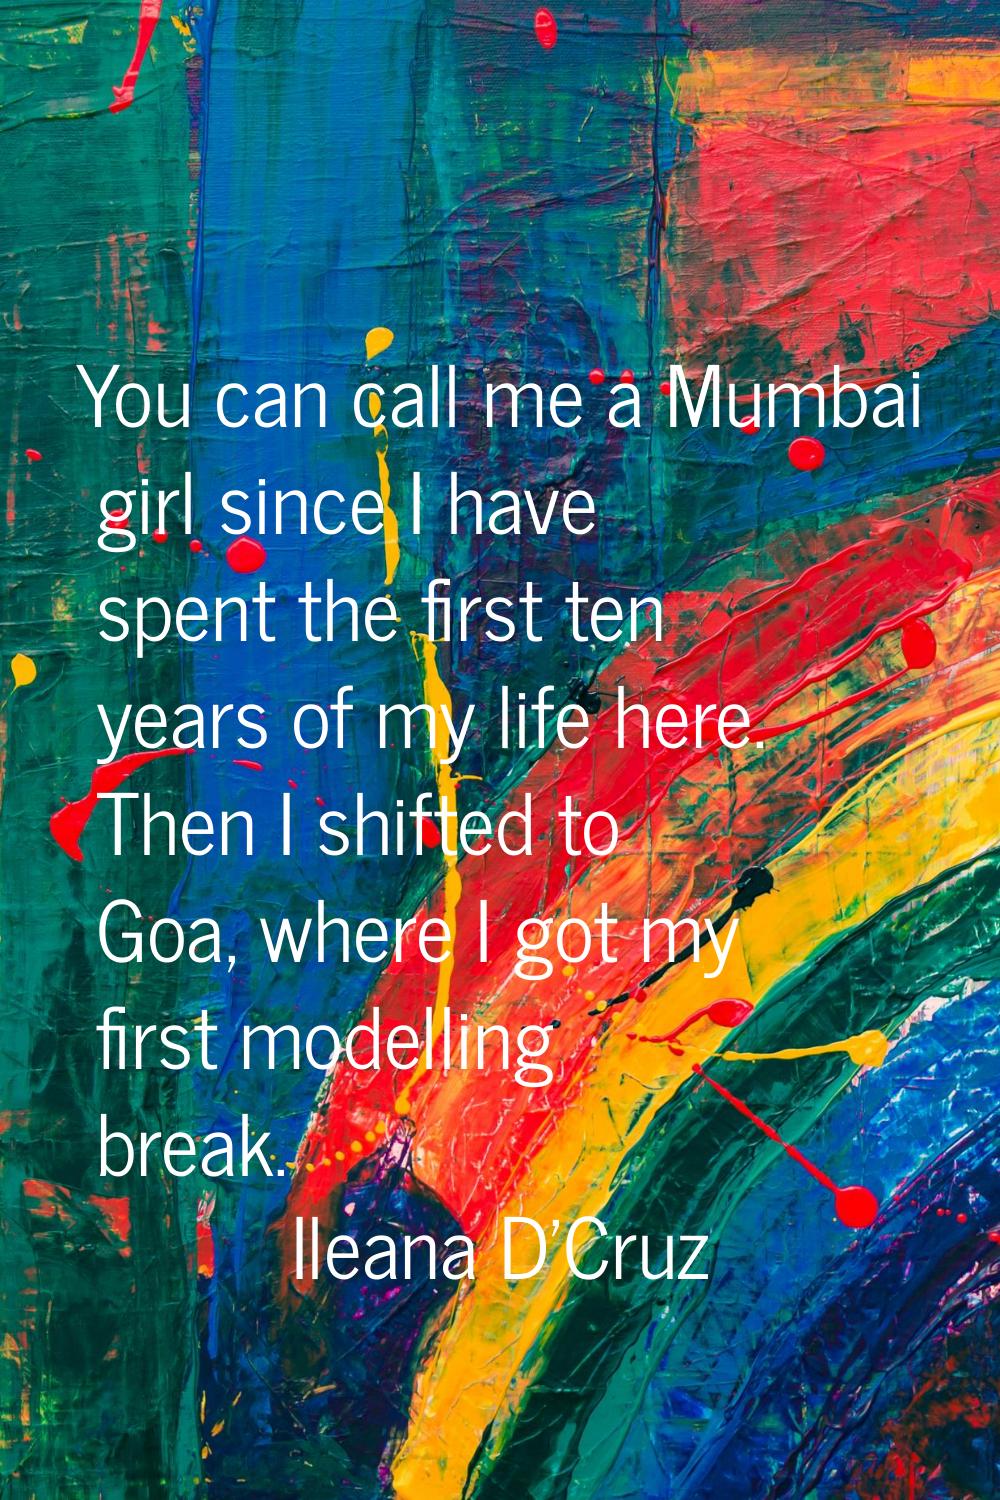 You can call me a Mumbai girl since I have spent the first ten years of my life here. Then I shifte